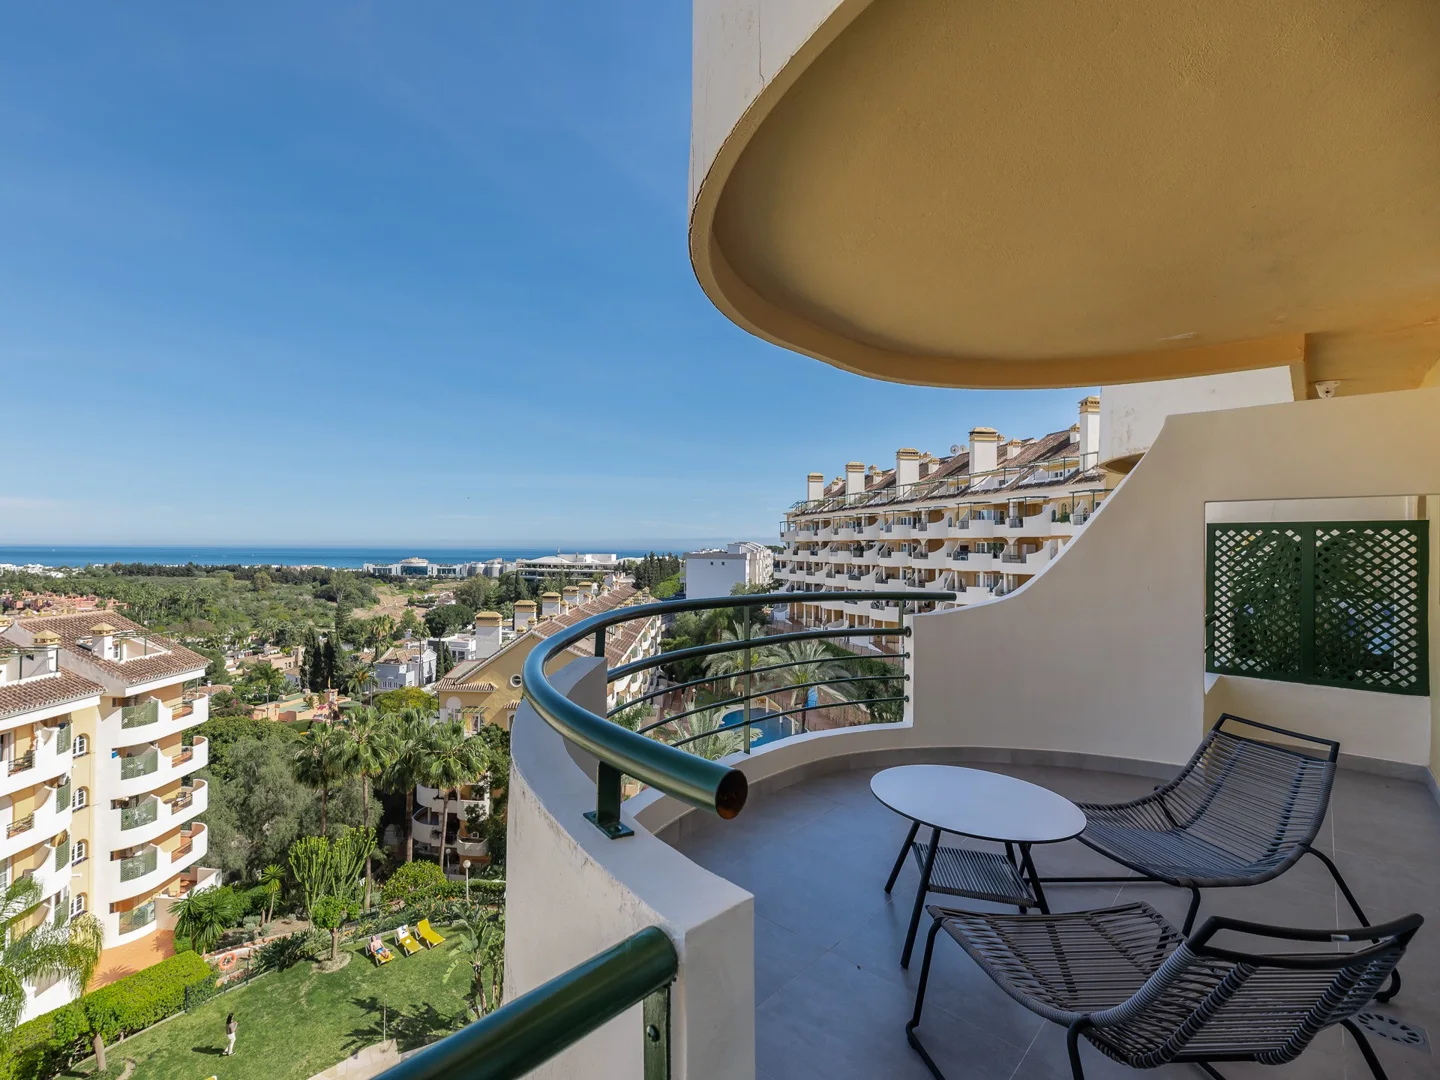 Nueva Andalucia: Renovated apartment with panoramic sea views in prime location